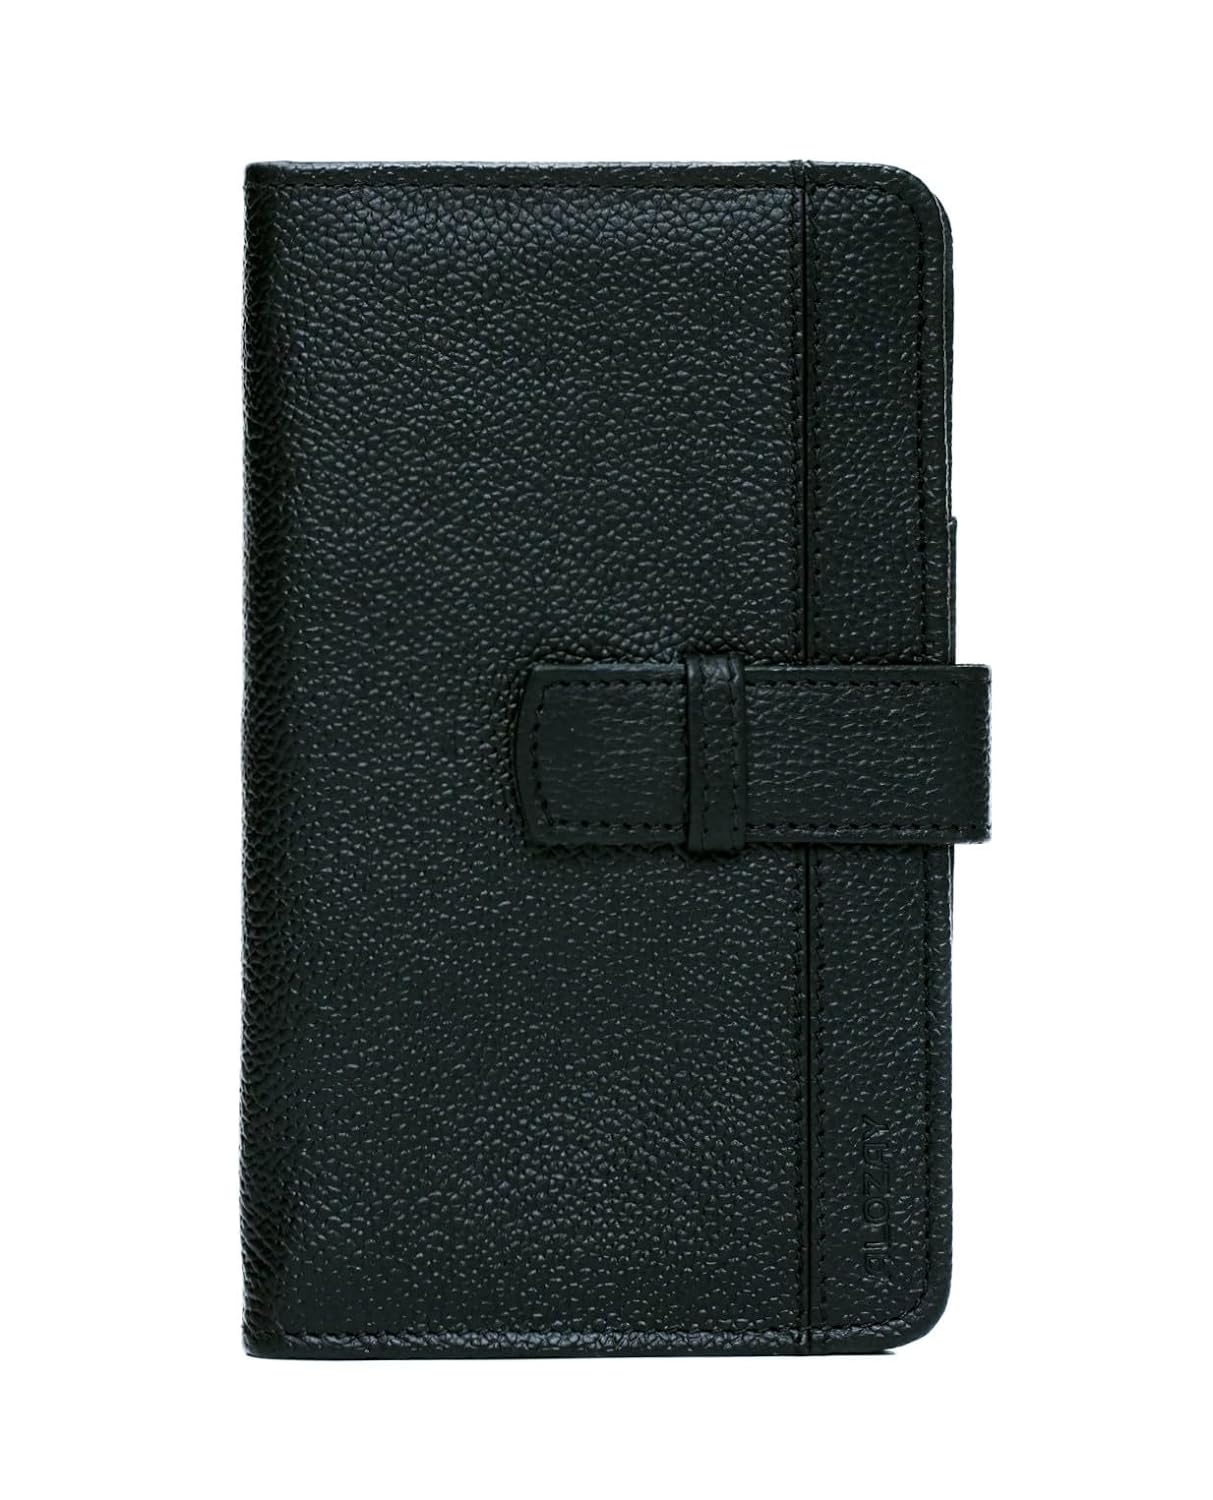 ALOZAY Leather Passport Holder Travel Wallet, Travel Document Organizer with Passport case, Holds 6 Cards, 1 ID Card, Cash, Pen holder, Small travel wallet in Slim Bifold style for Men and Women, Black, Travel Wallet